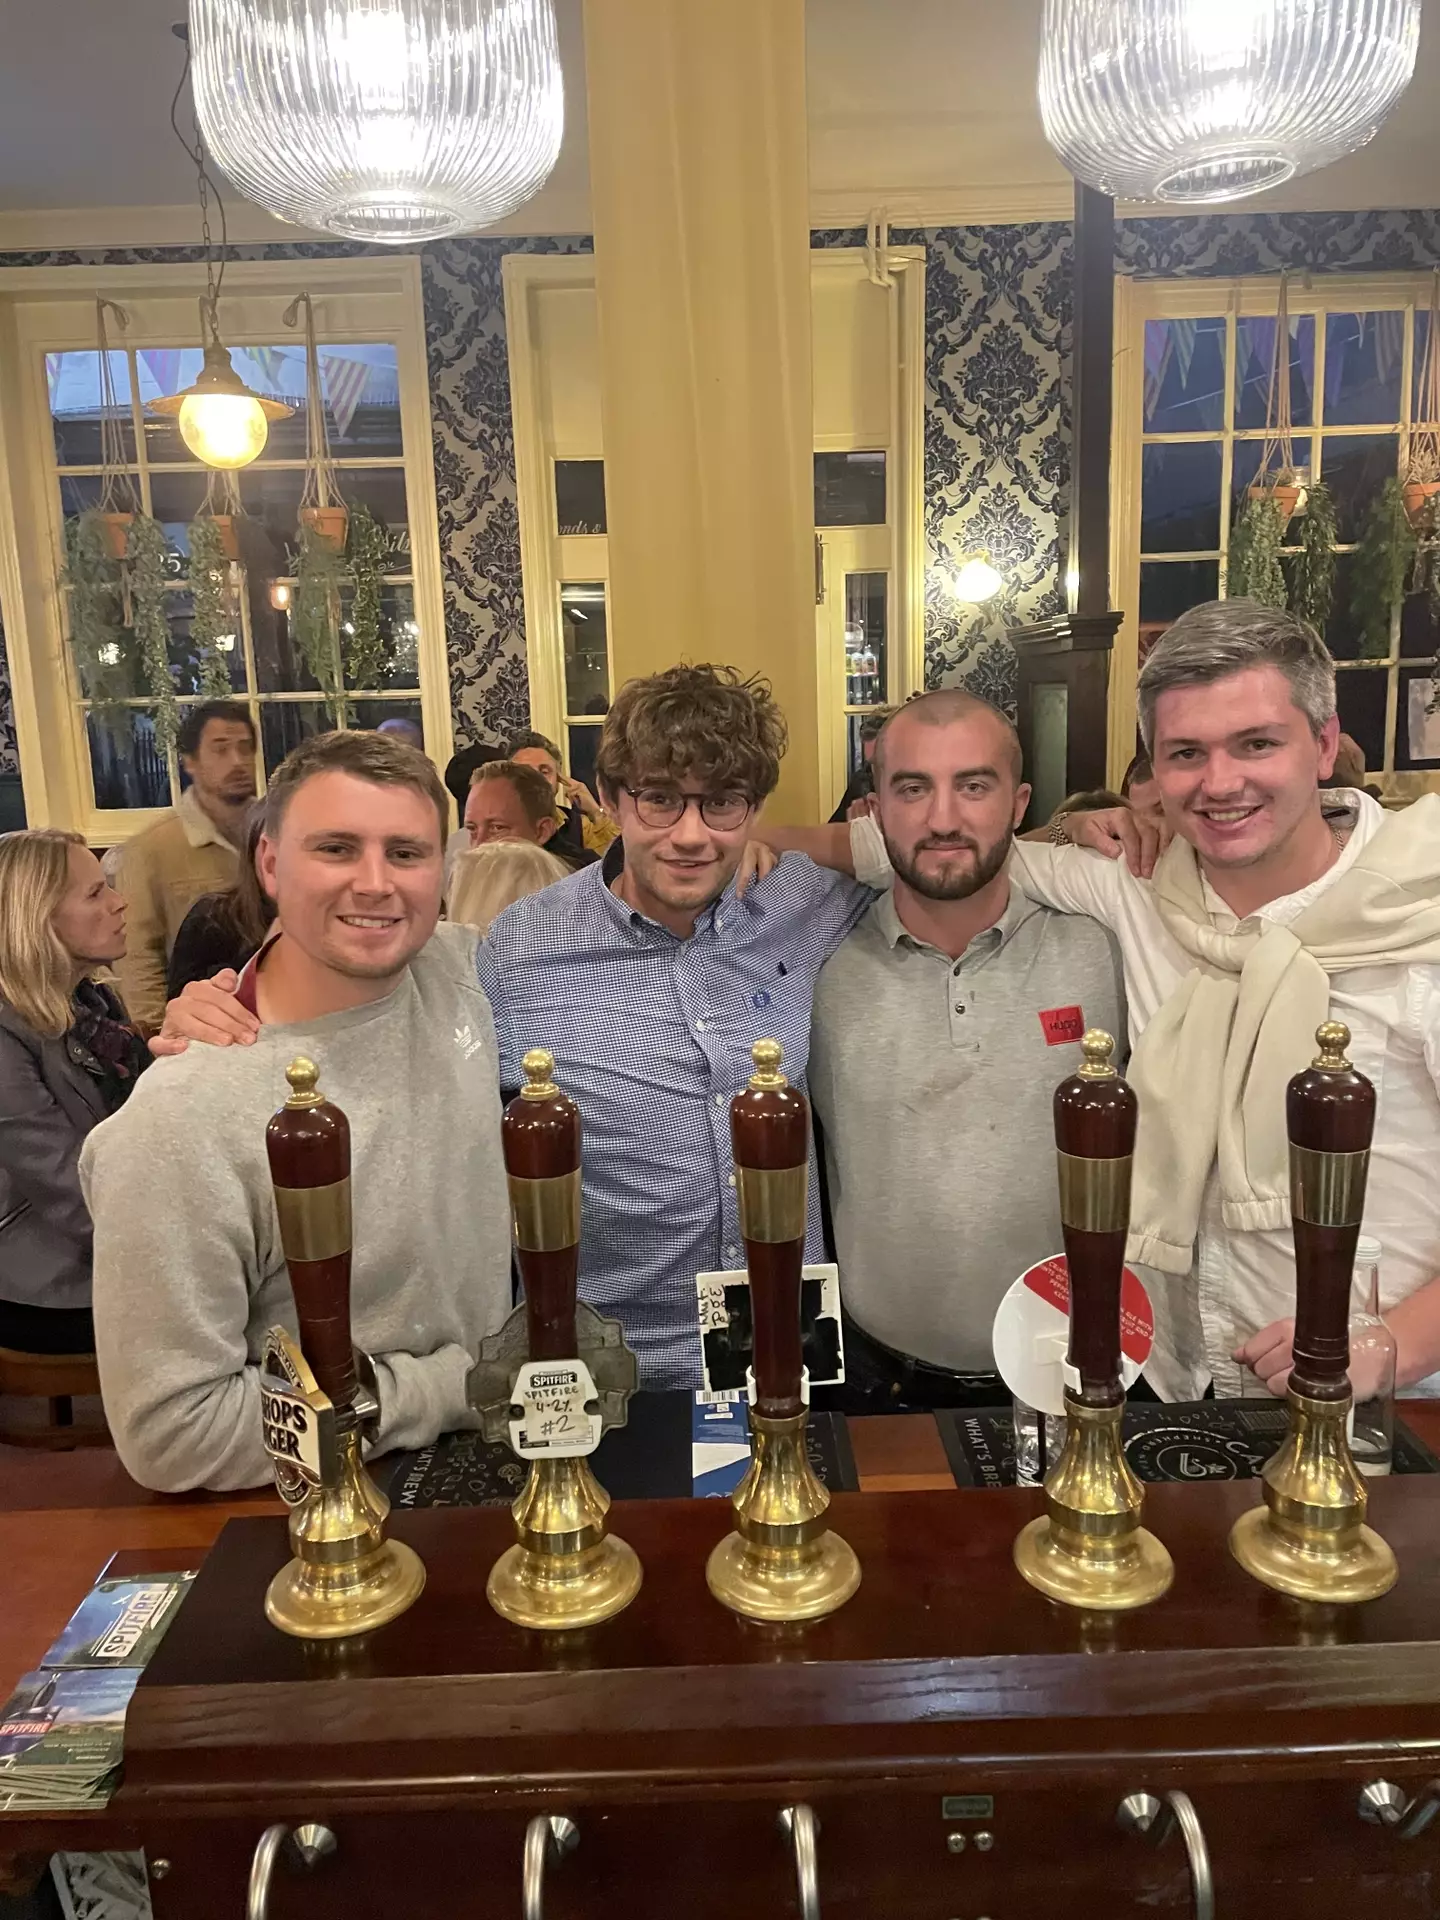 The trio aimed to visit a total of 75 pubs in 24 hours.